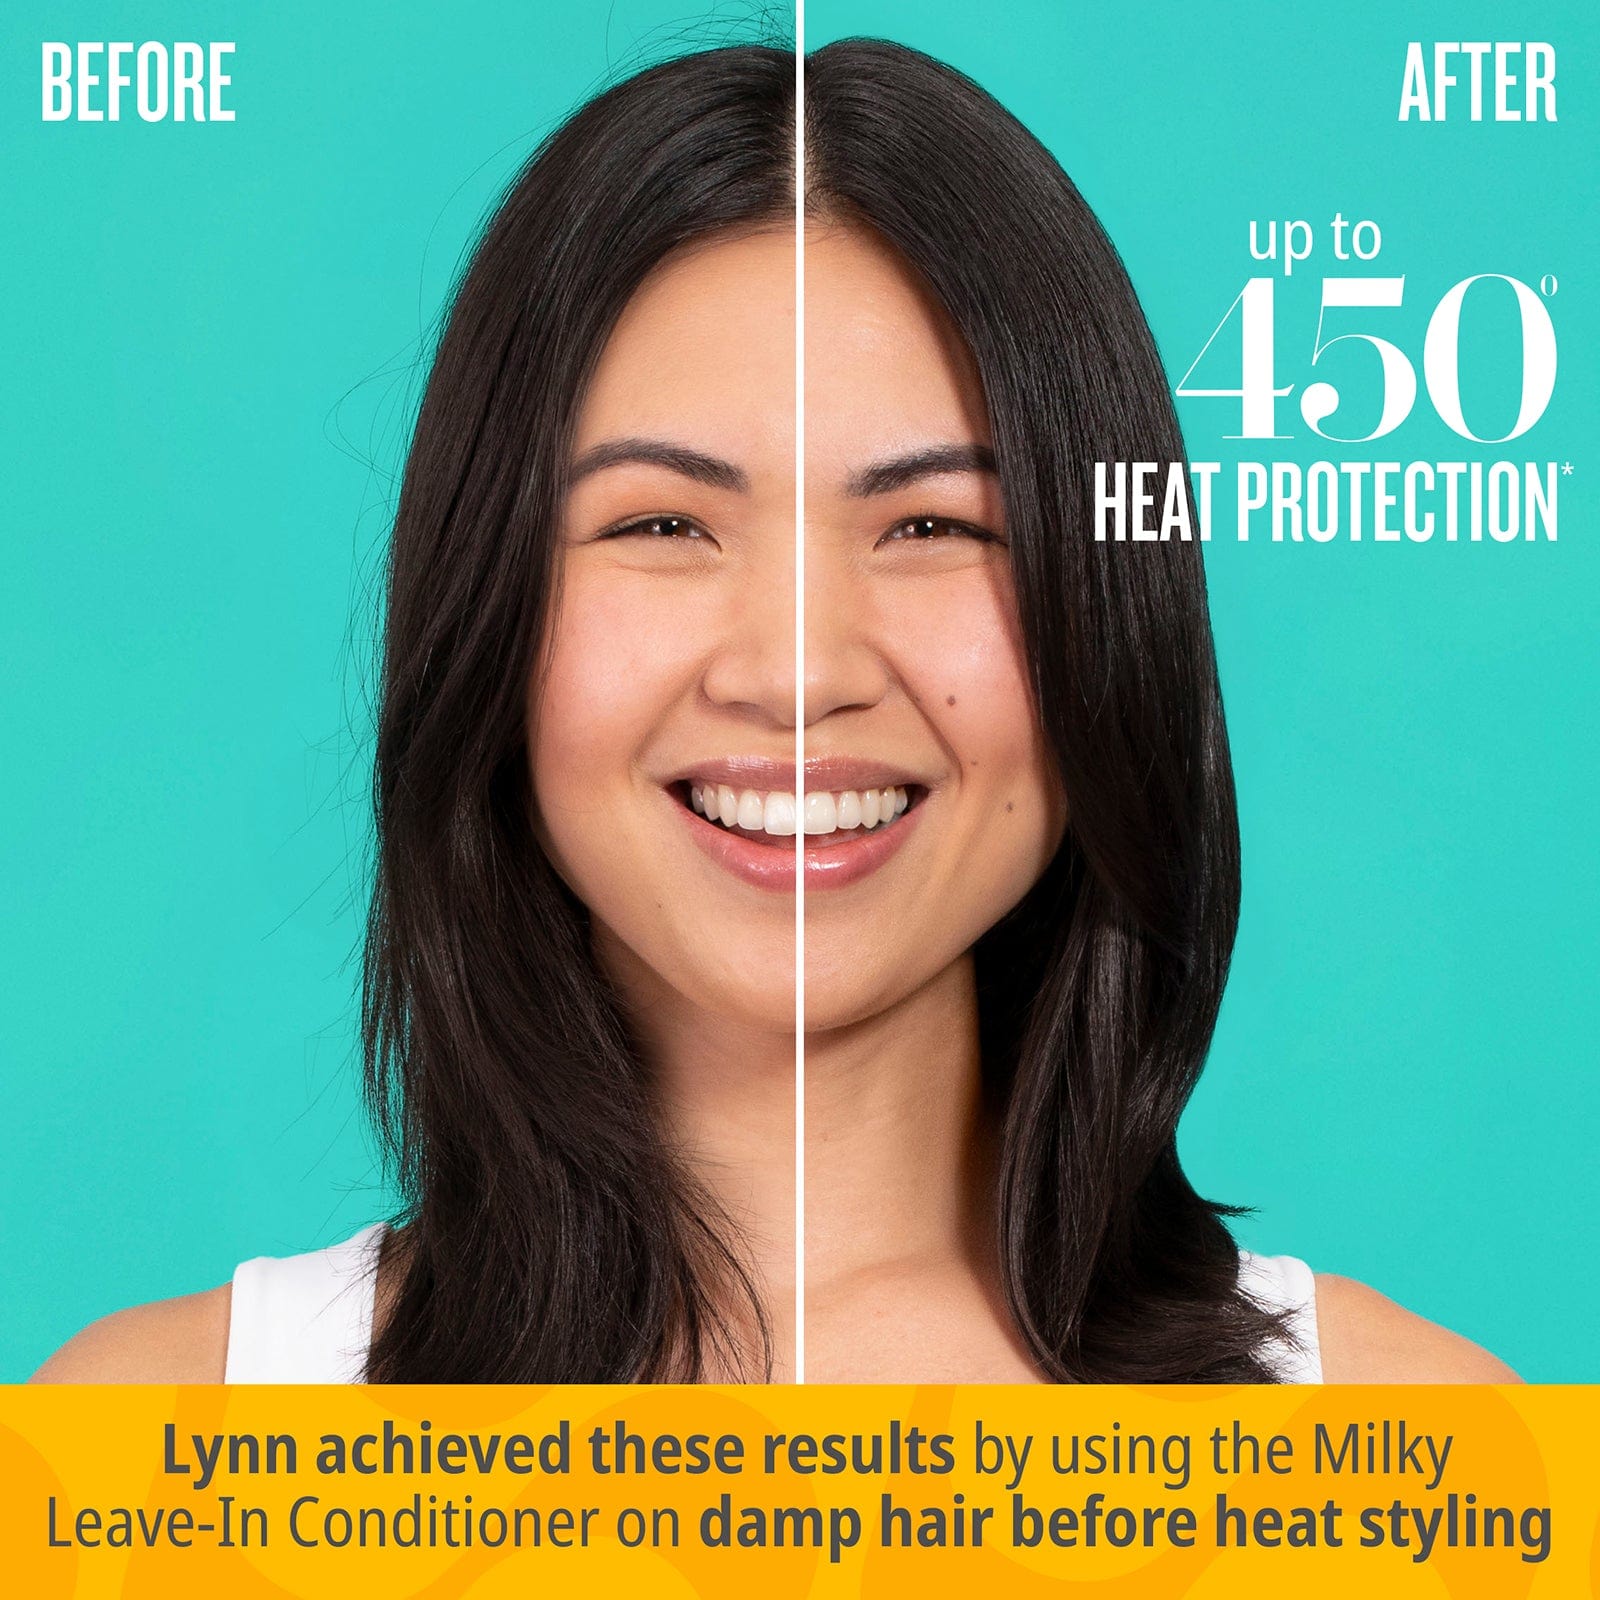 Before | After - up to 450 degree heat protection | Lynn achieved these results by using the Milky leave-in Conditioner on damp hair before heat styling